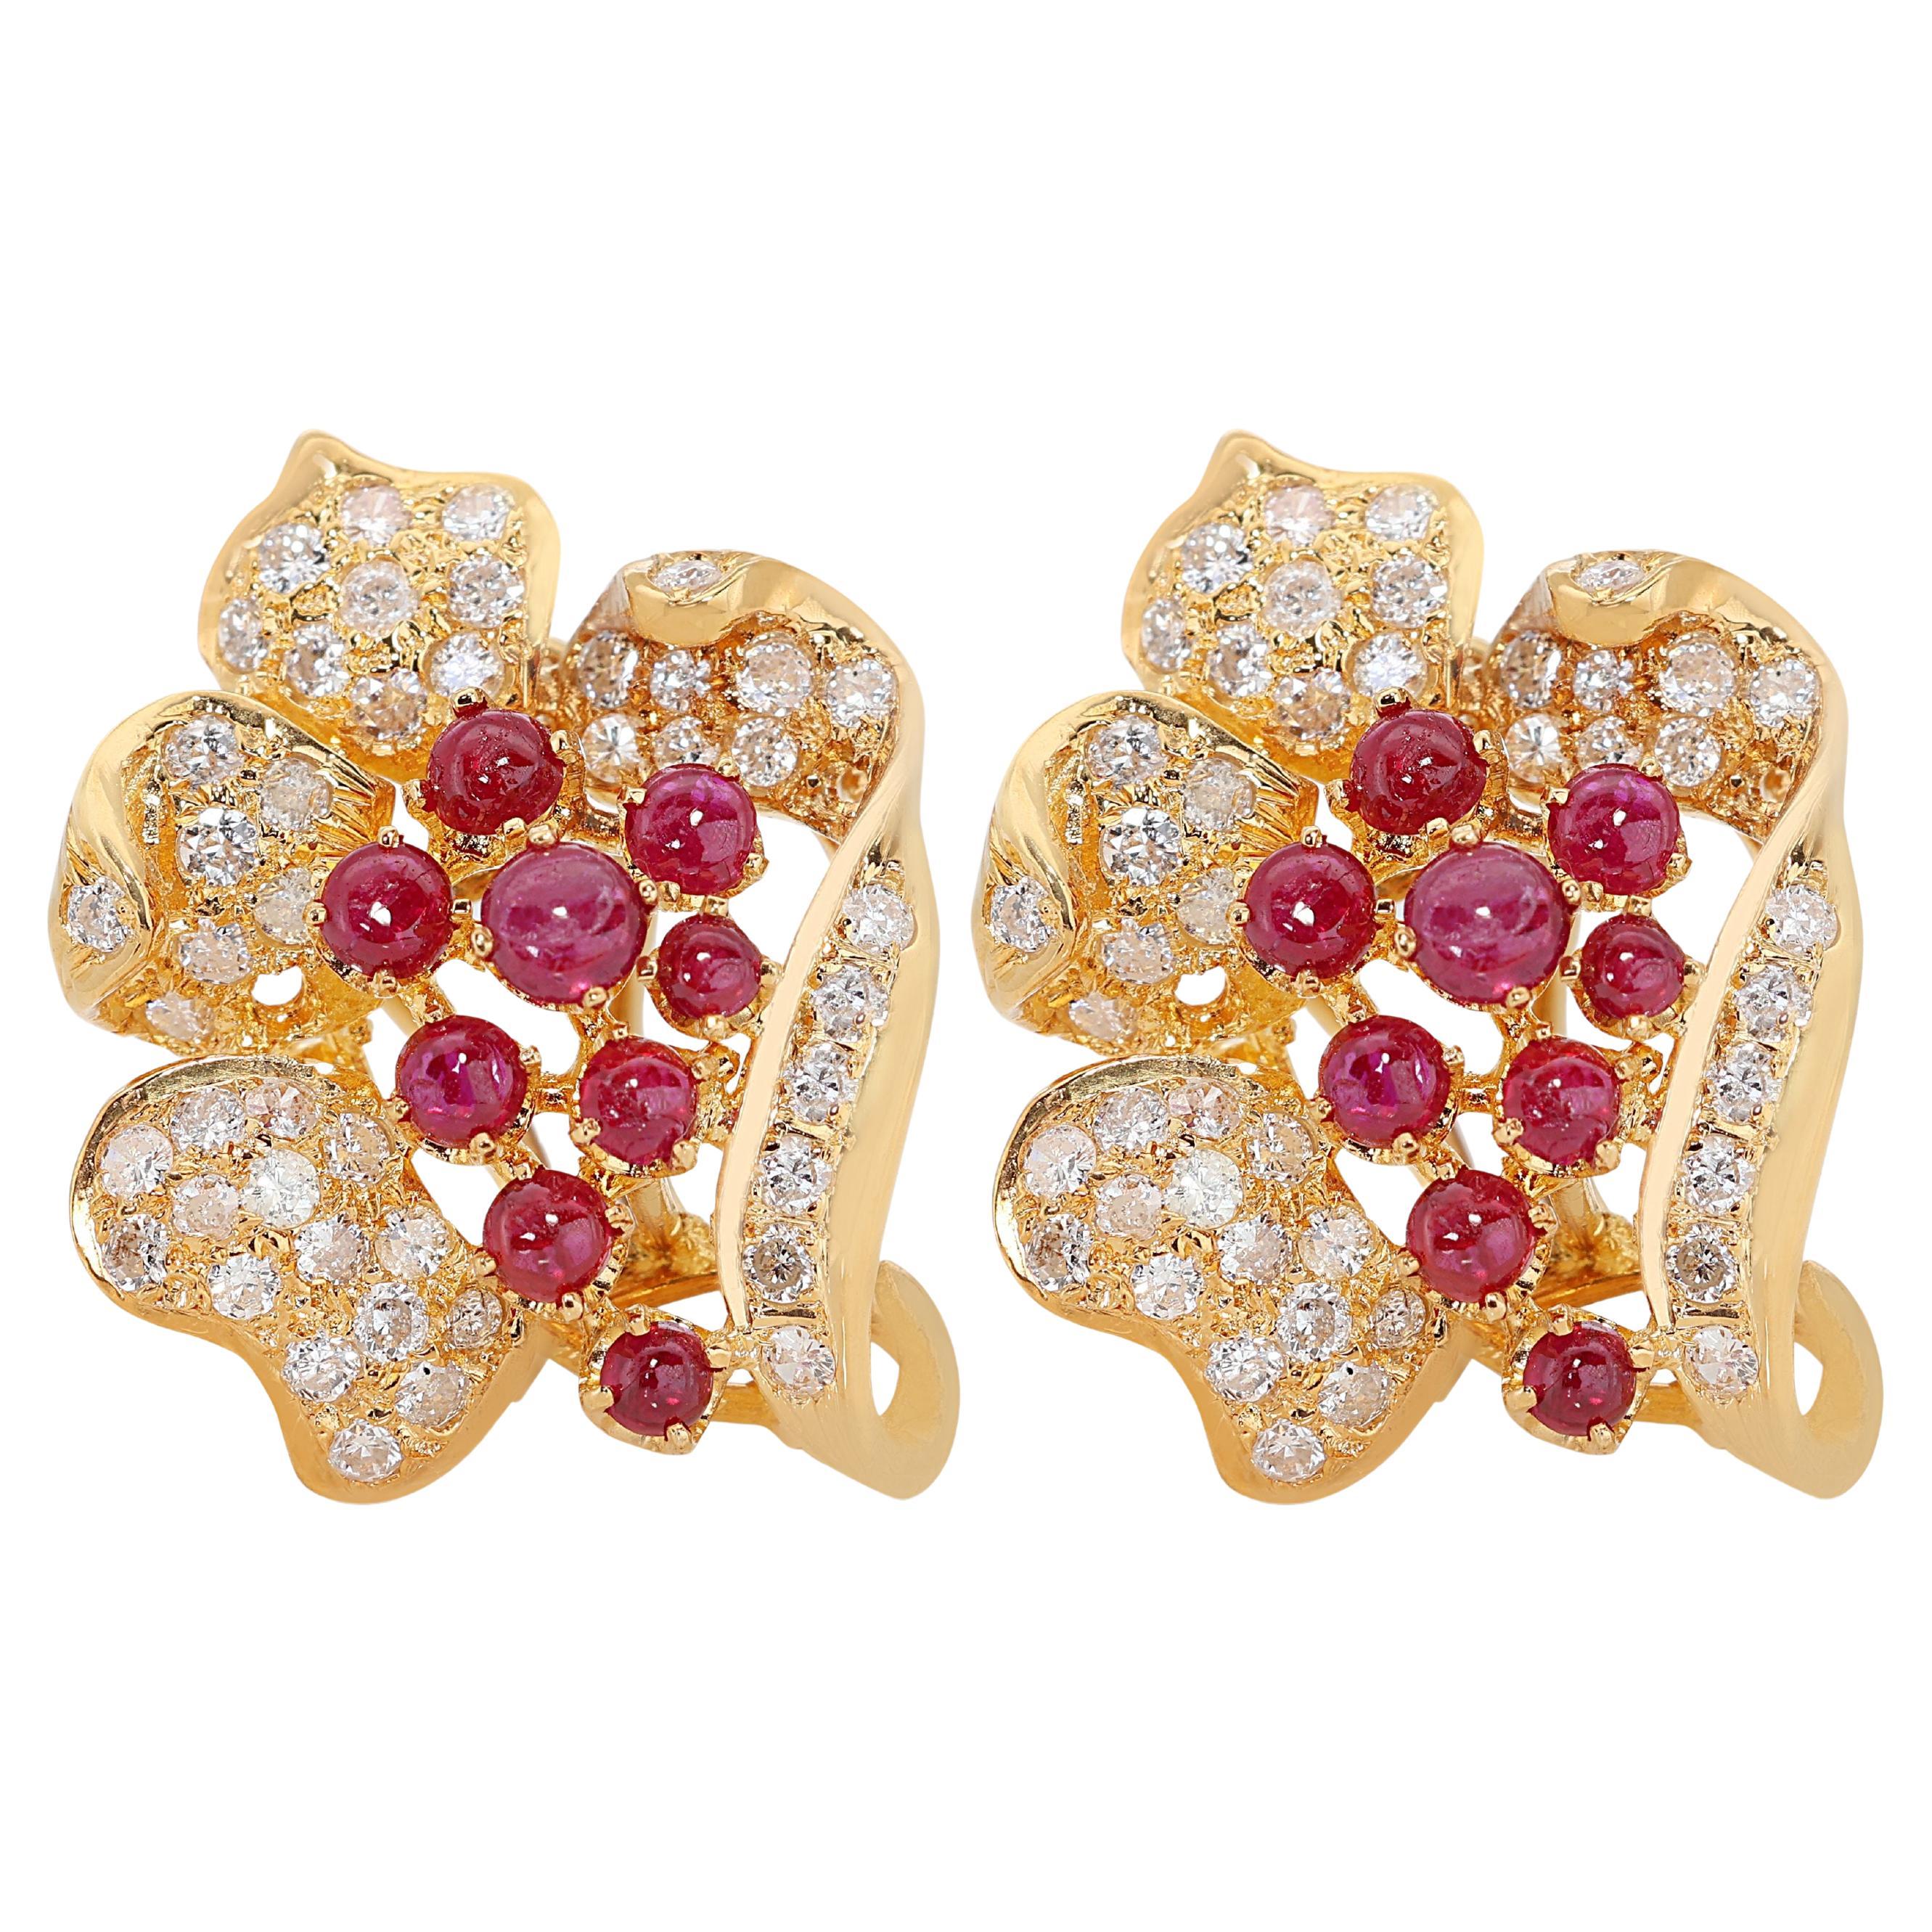 Captivating 0.90ct Ruby Earrings set in 18K Yellow Gold